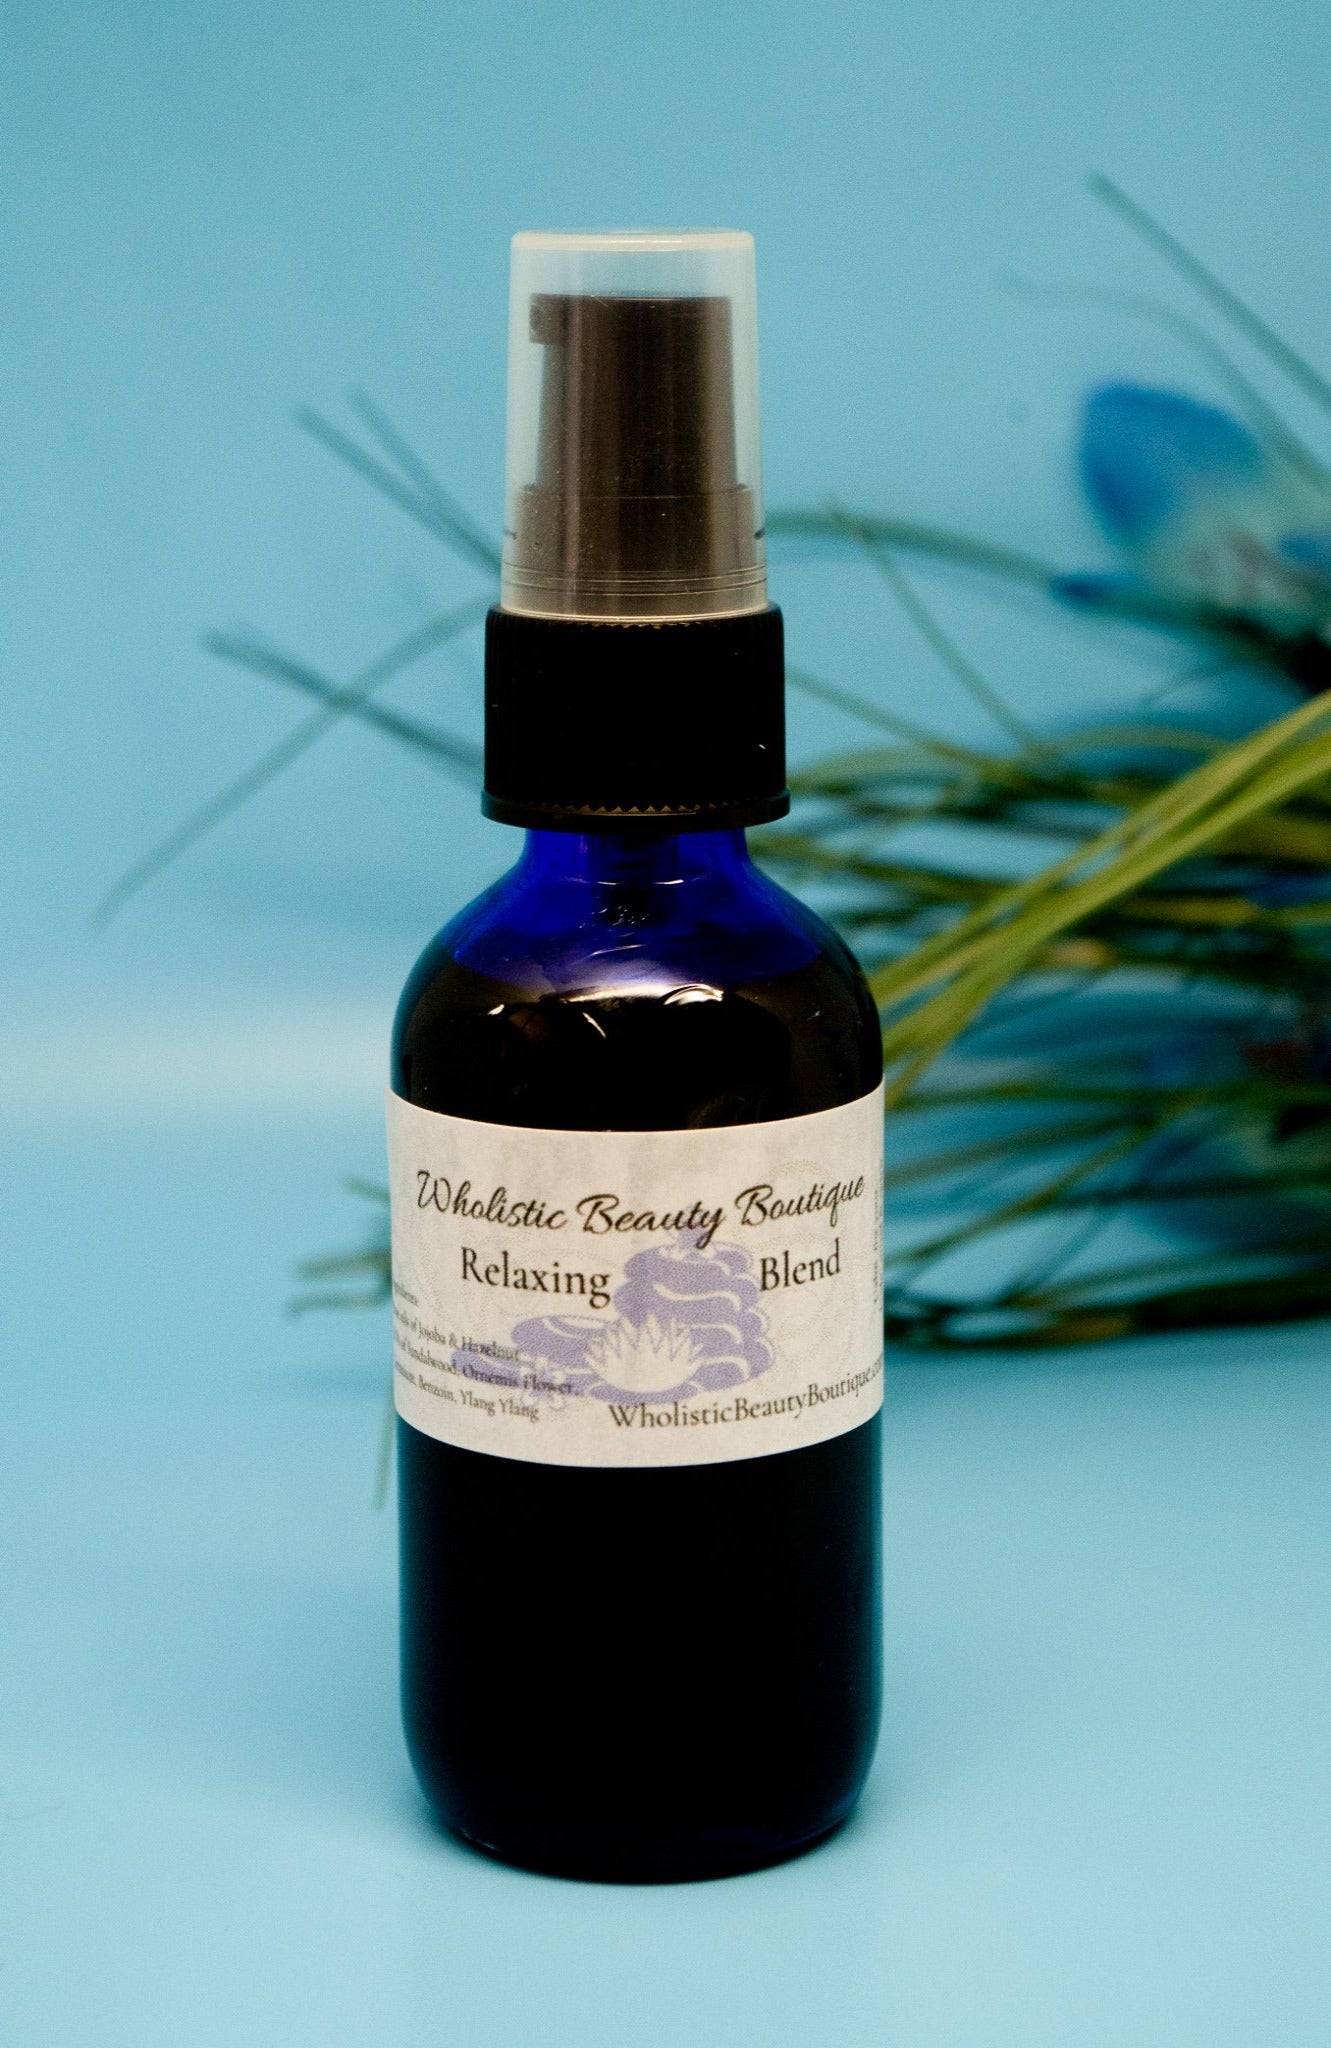 Relaxing essential oil blend, wholistic beauty